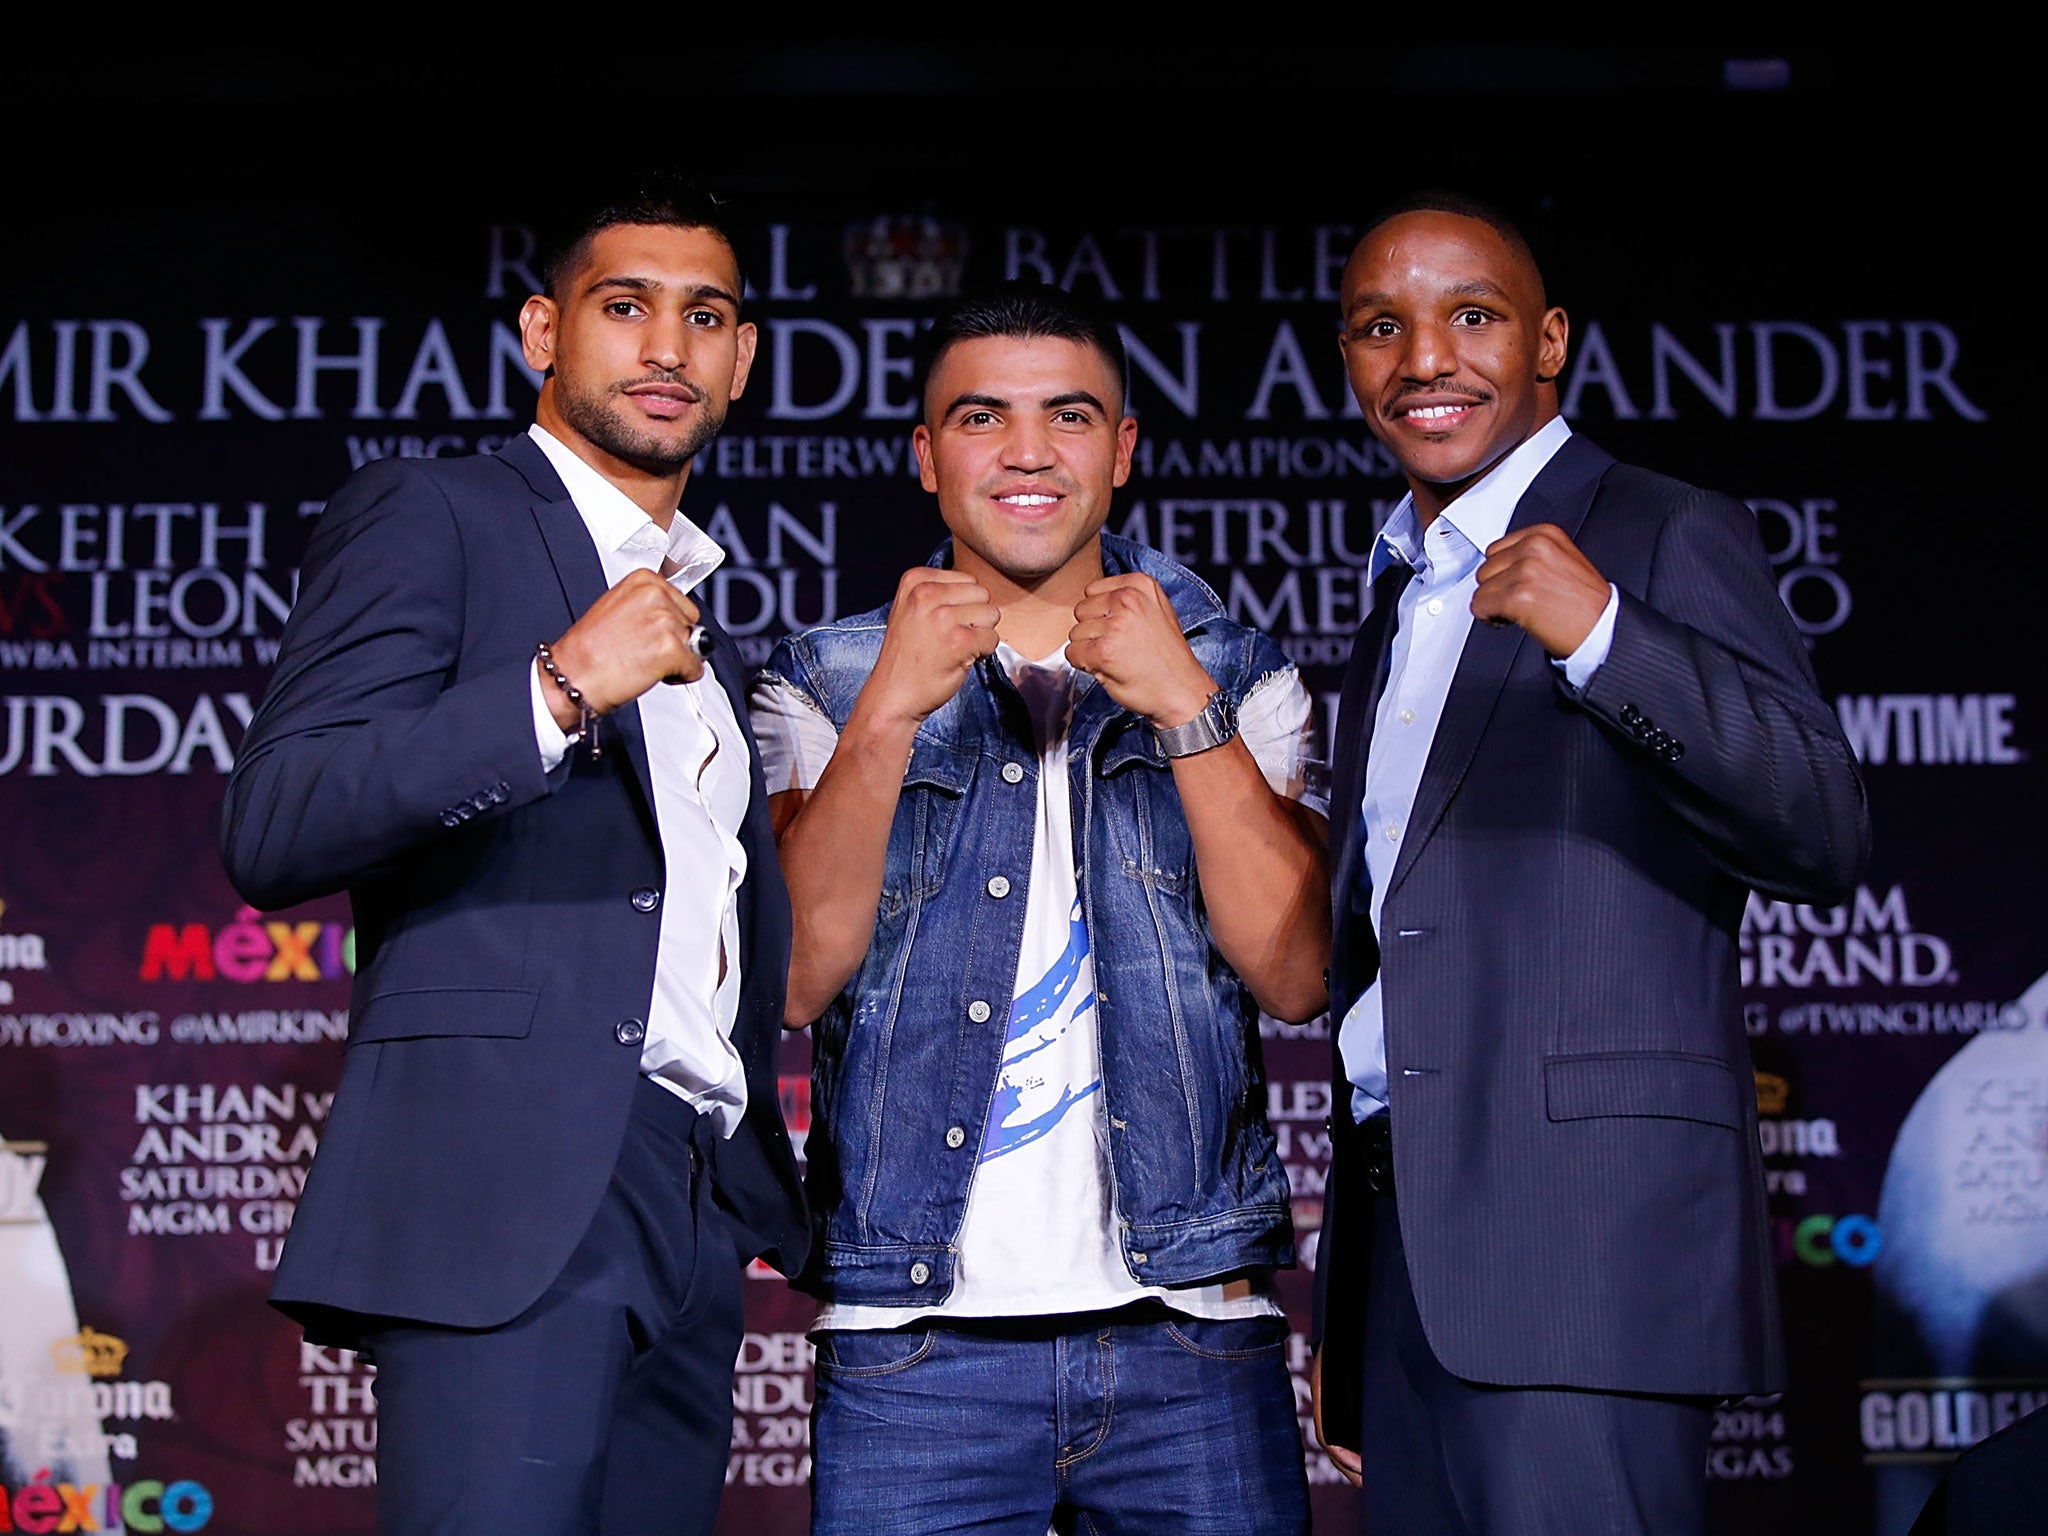 Big time: This will be Amir Khan’s first fight at the MGM Grand’s main arena